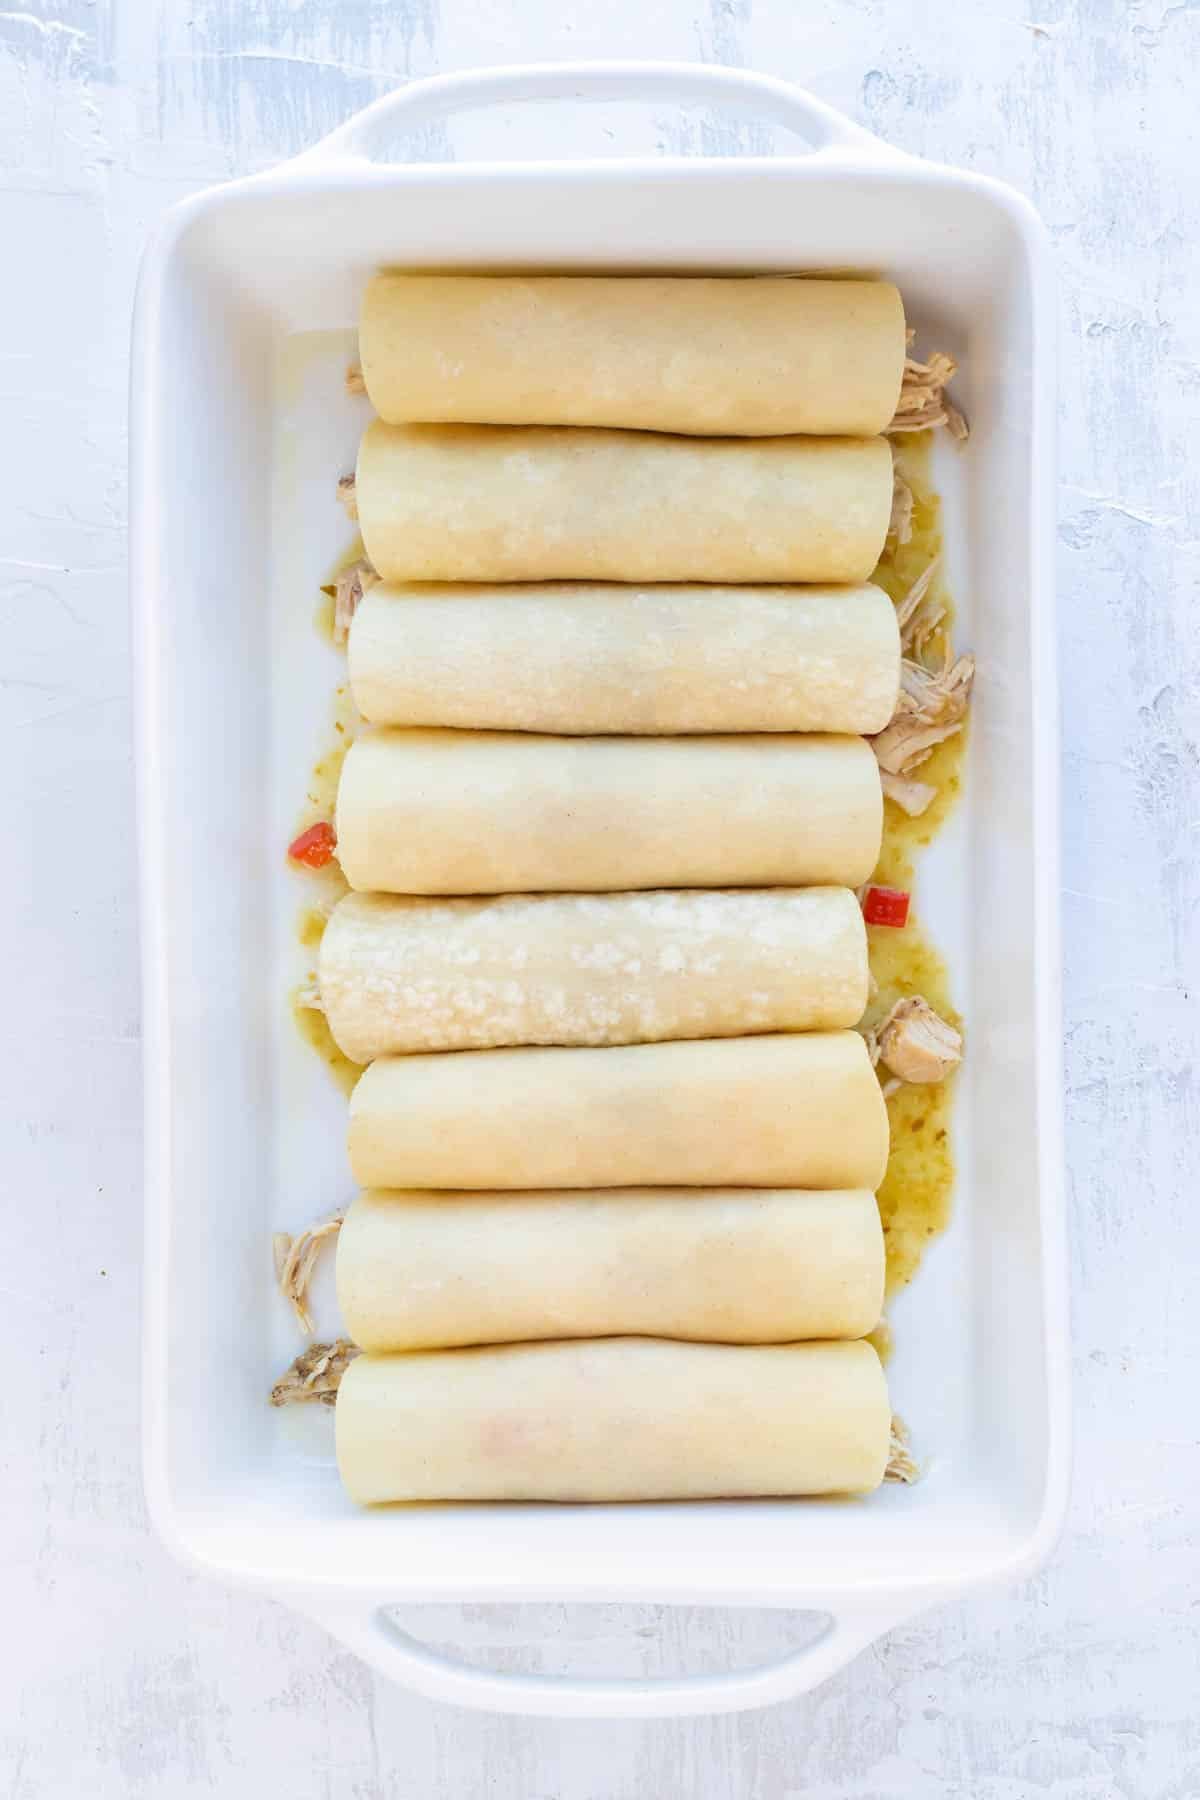 Rolled enchiladas are lined up in a casserole dish.